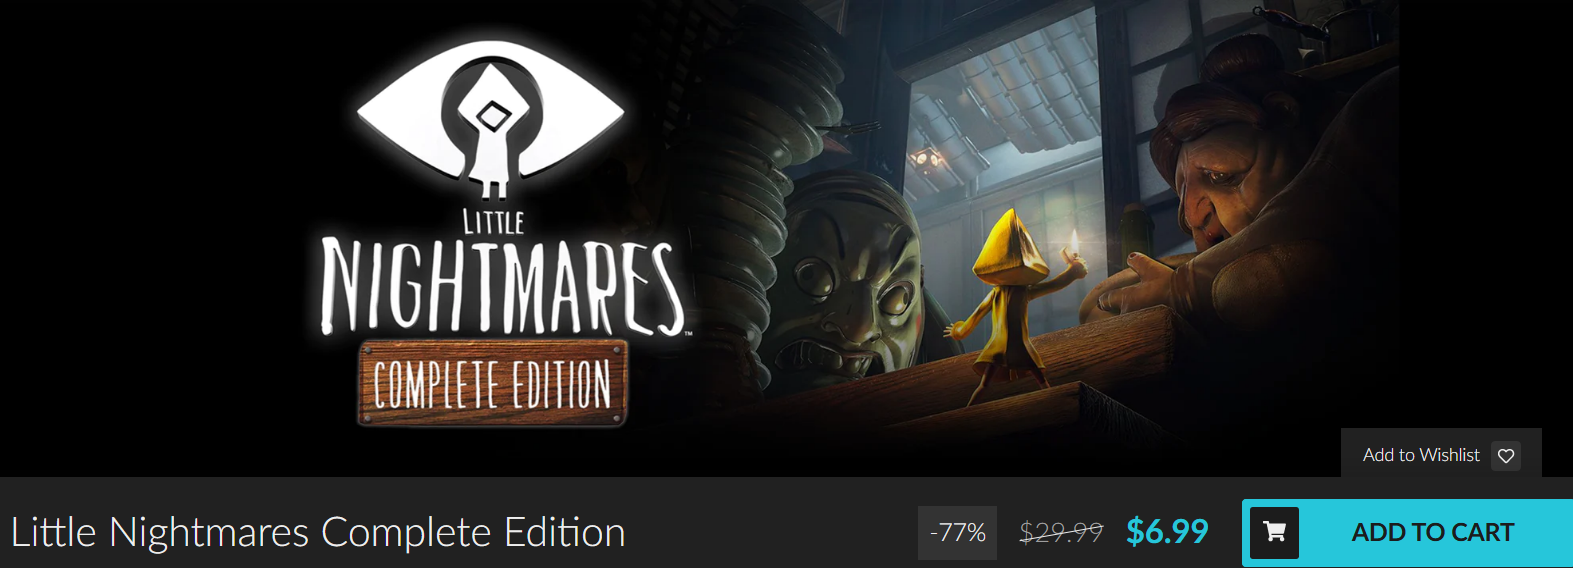 Screenshot_2019-11-02 Little Nightmares Complete Edition PC Steam Fanatical.png